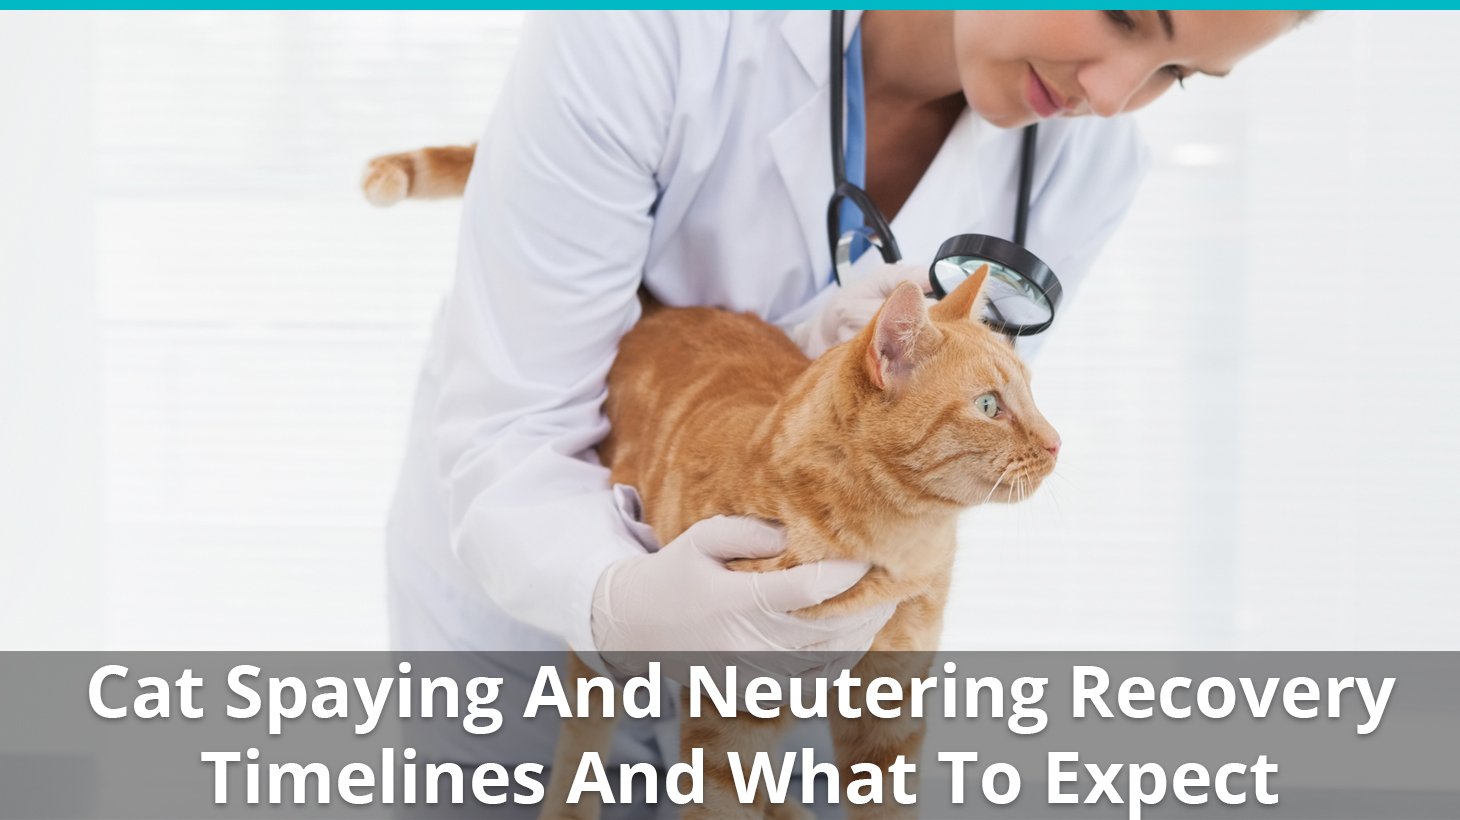 Cat Spaying And Neutering Recovery Timelines And What To Expect